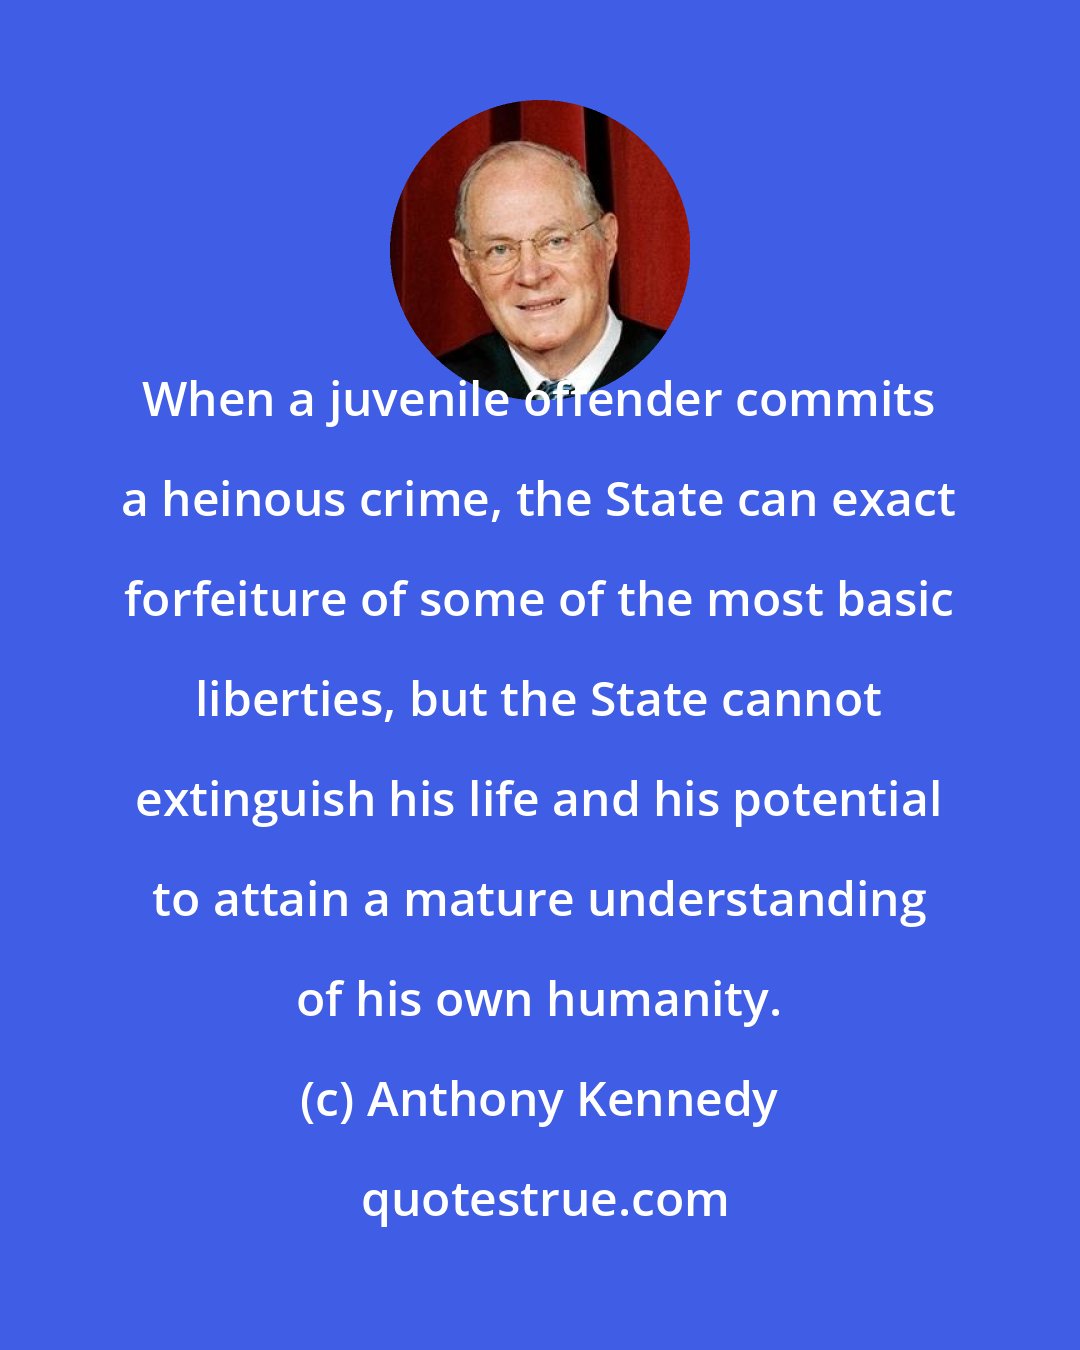 Anthony Kennedy: When a juvenile offender commits a heinous crime, the State can exact forfeiture of some of the most basic liberties, but the State cannot extinguish his life and his potential to attain a mature understanding of his own humanity.